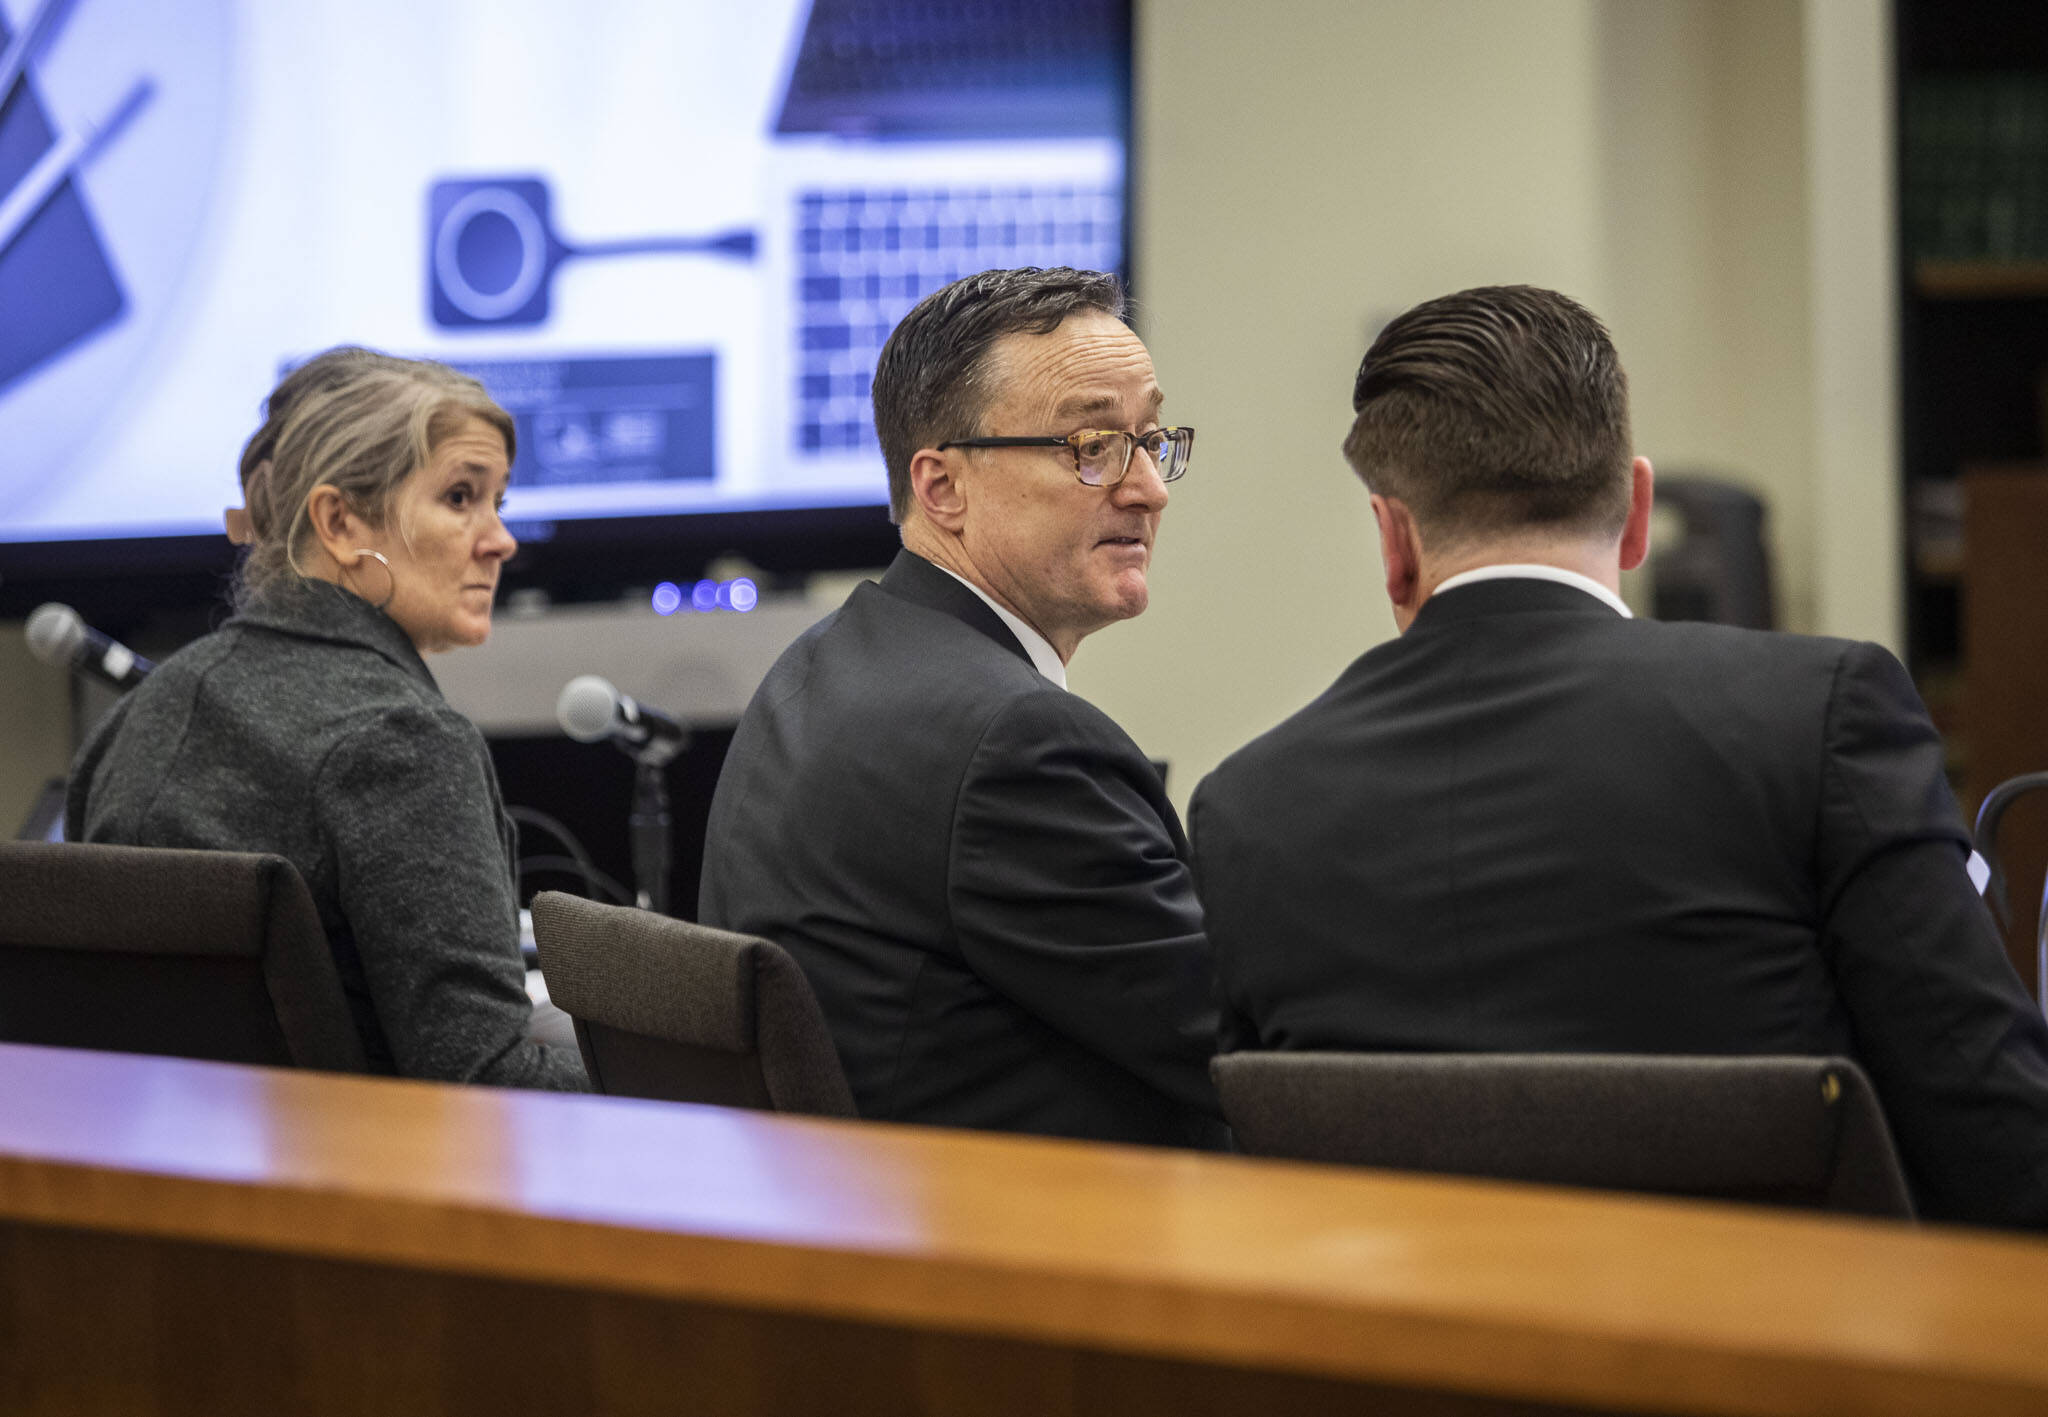 Defense attorney Natalie Tarantino, left, listens while prosecutors Craig Matheson, center, and Bob Langbehn, right, discuss a juror during jury selection at the Snohomish County Courthouse on Tuesday, March 14, 2023 in Everett, Washington. (Olivia Vanni / The Herald)